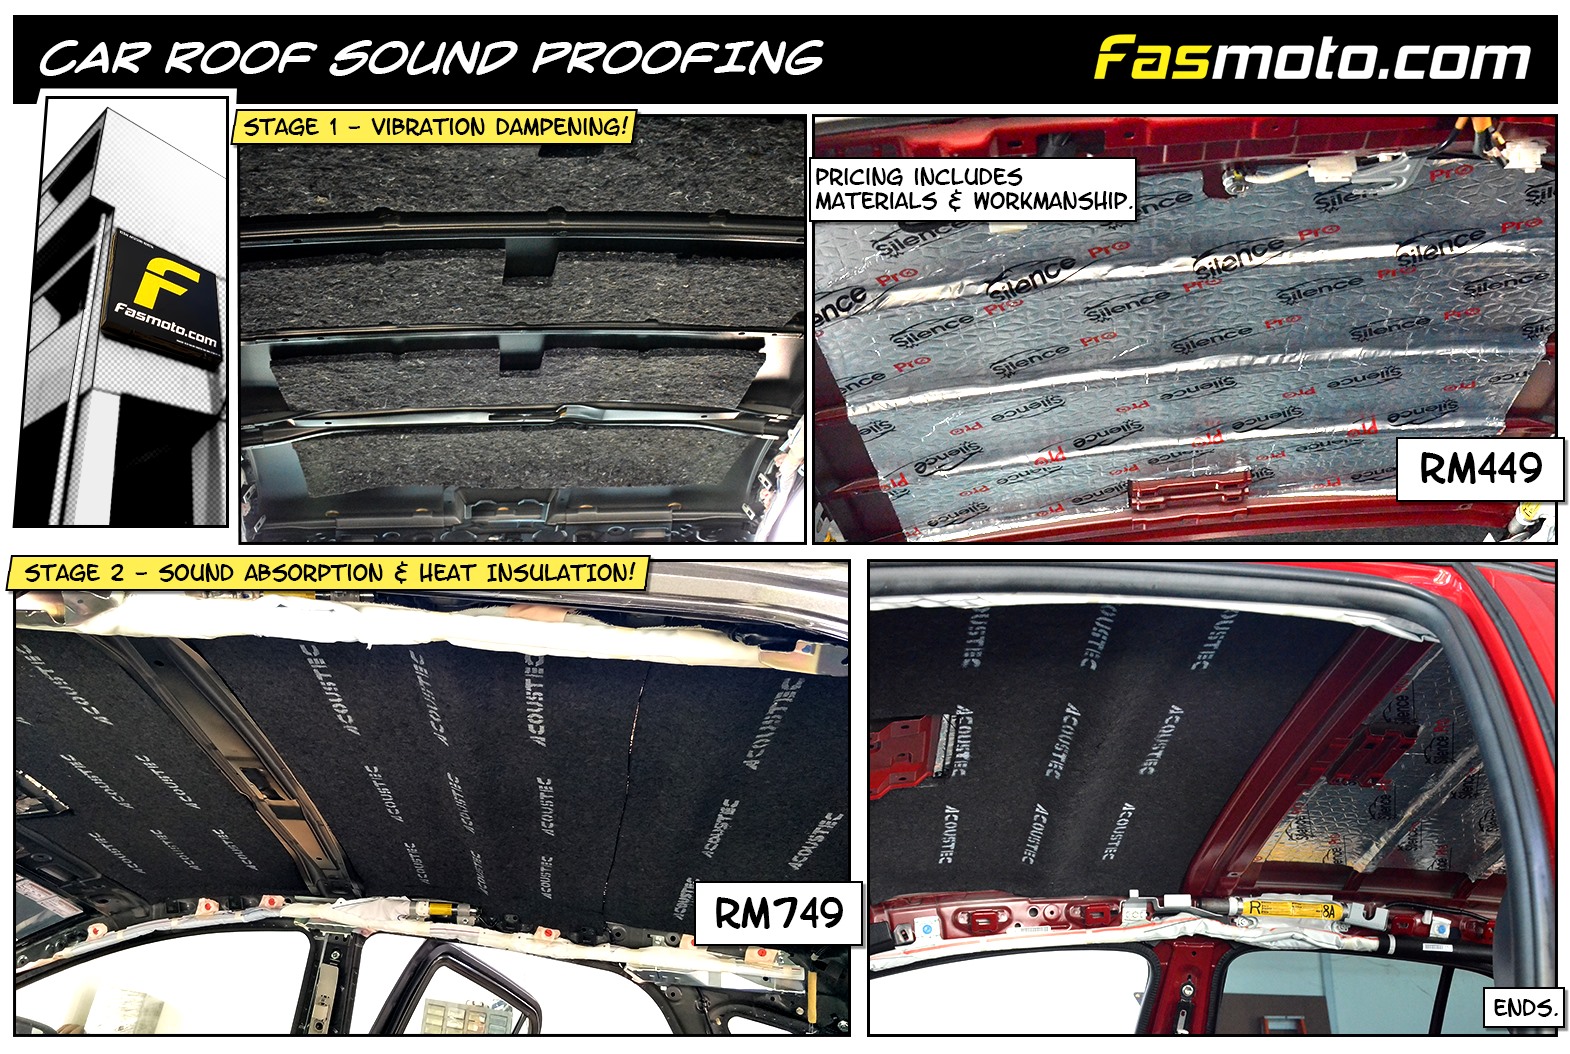 Fasmoto Roof Soundproofing Pricing